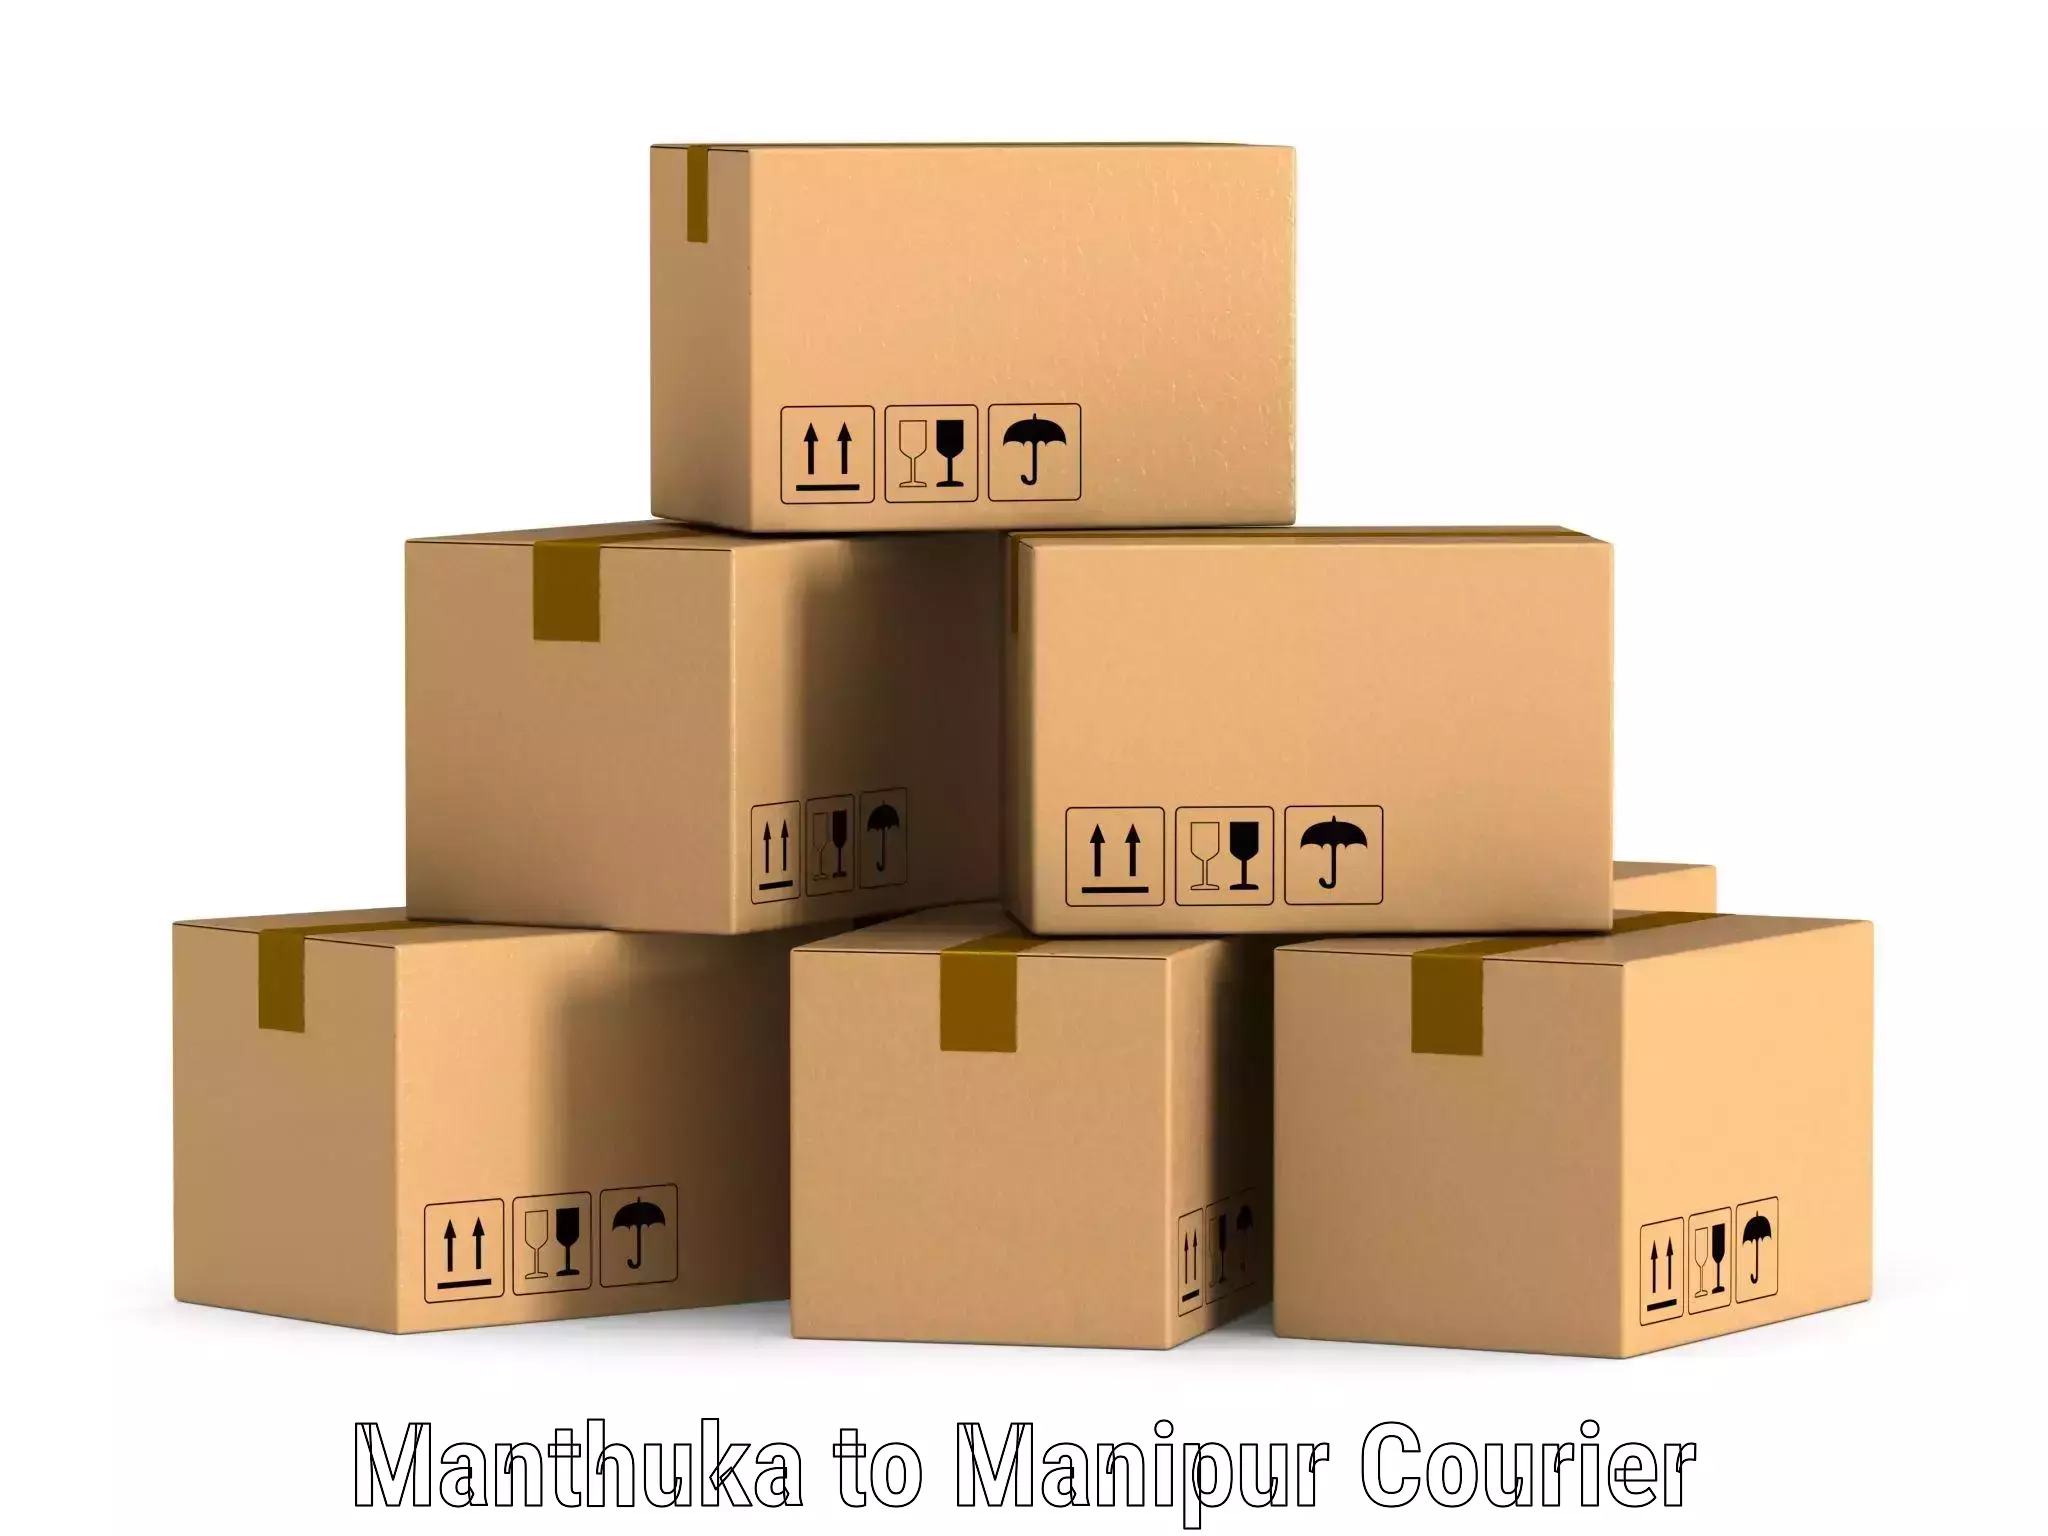 Multi-national courier services Manthuka to Manipur